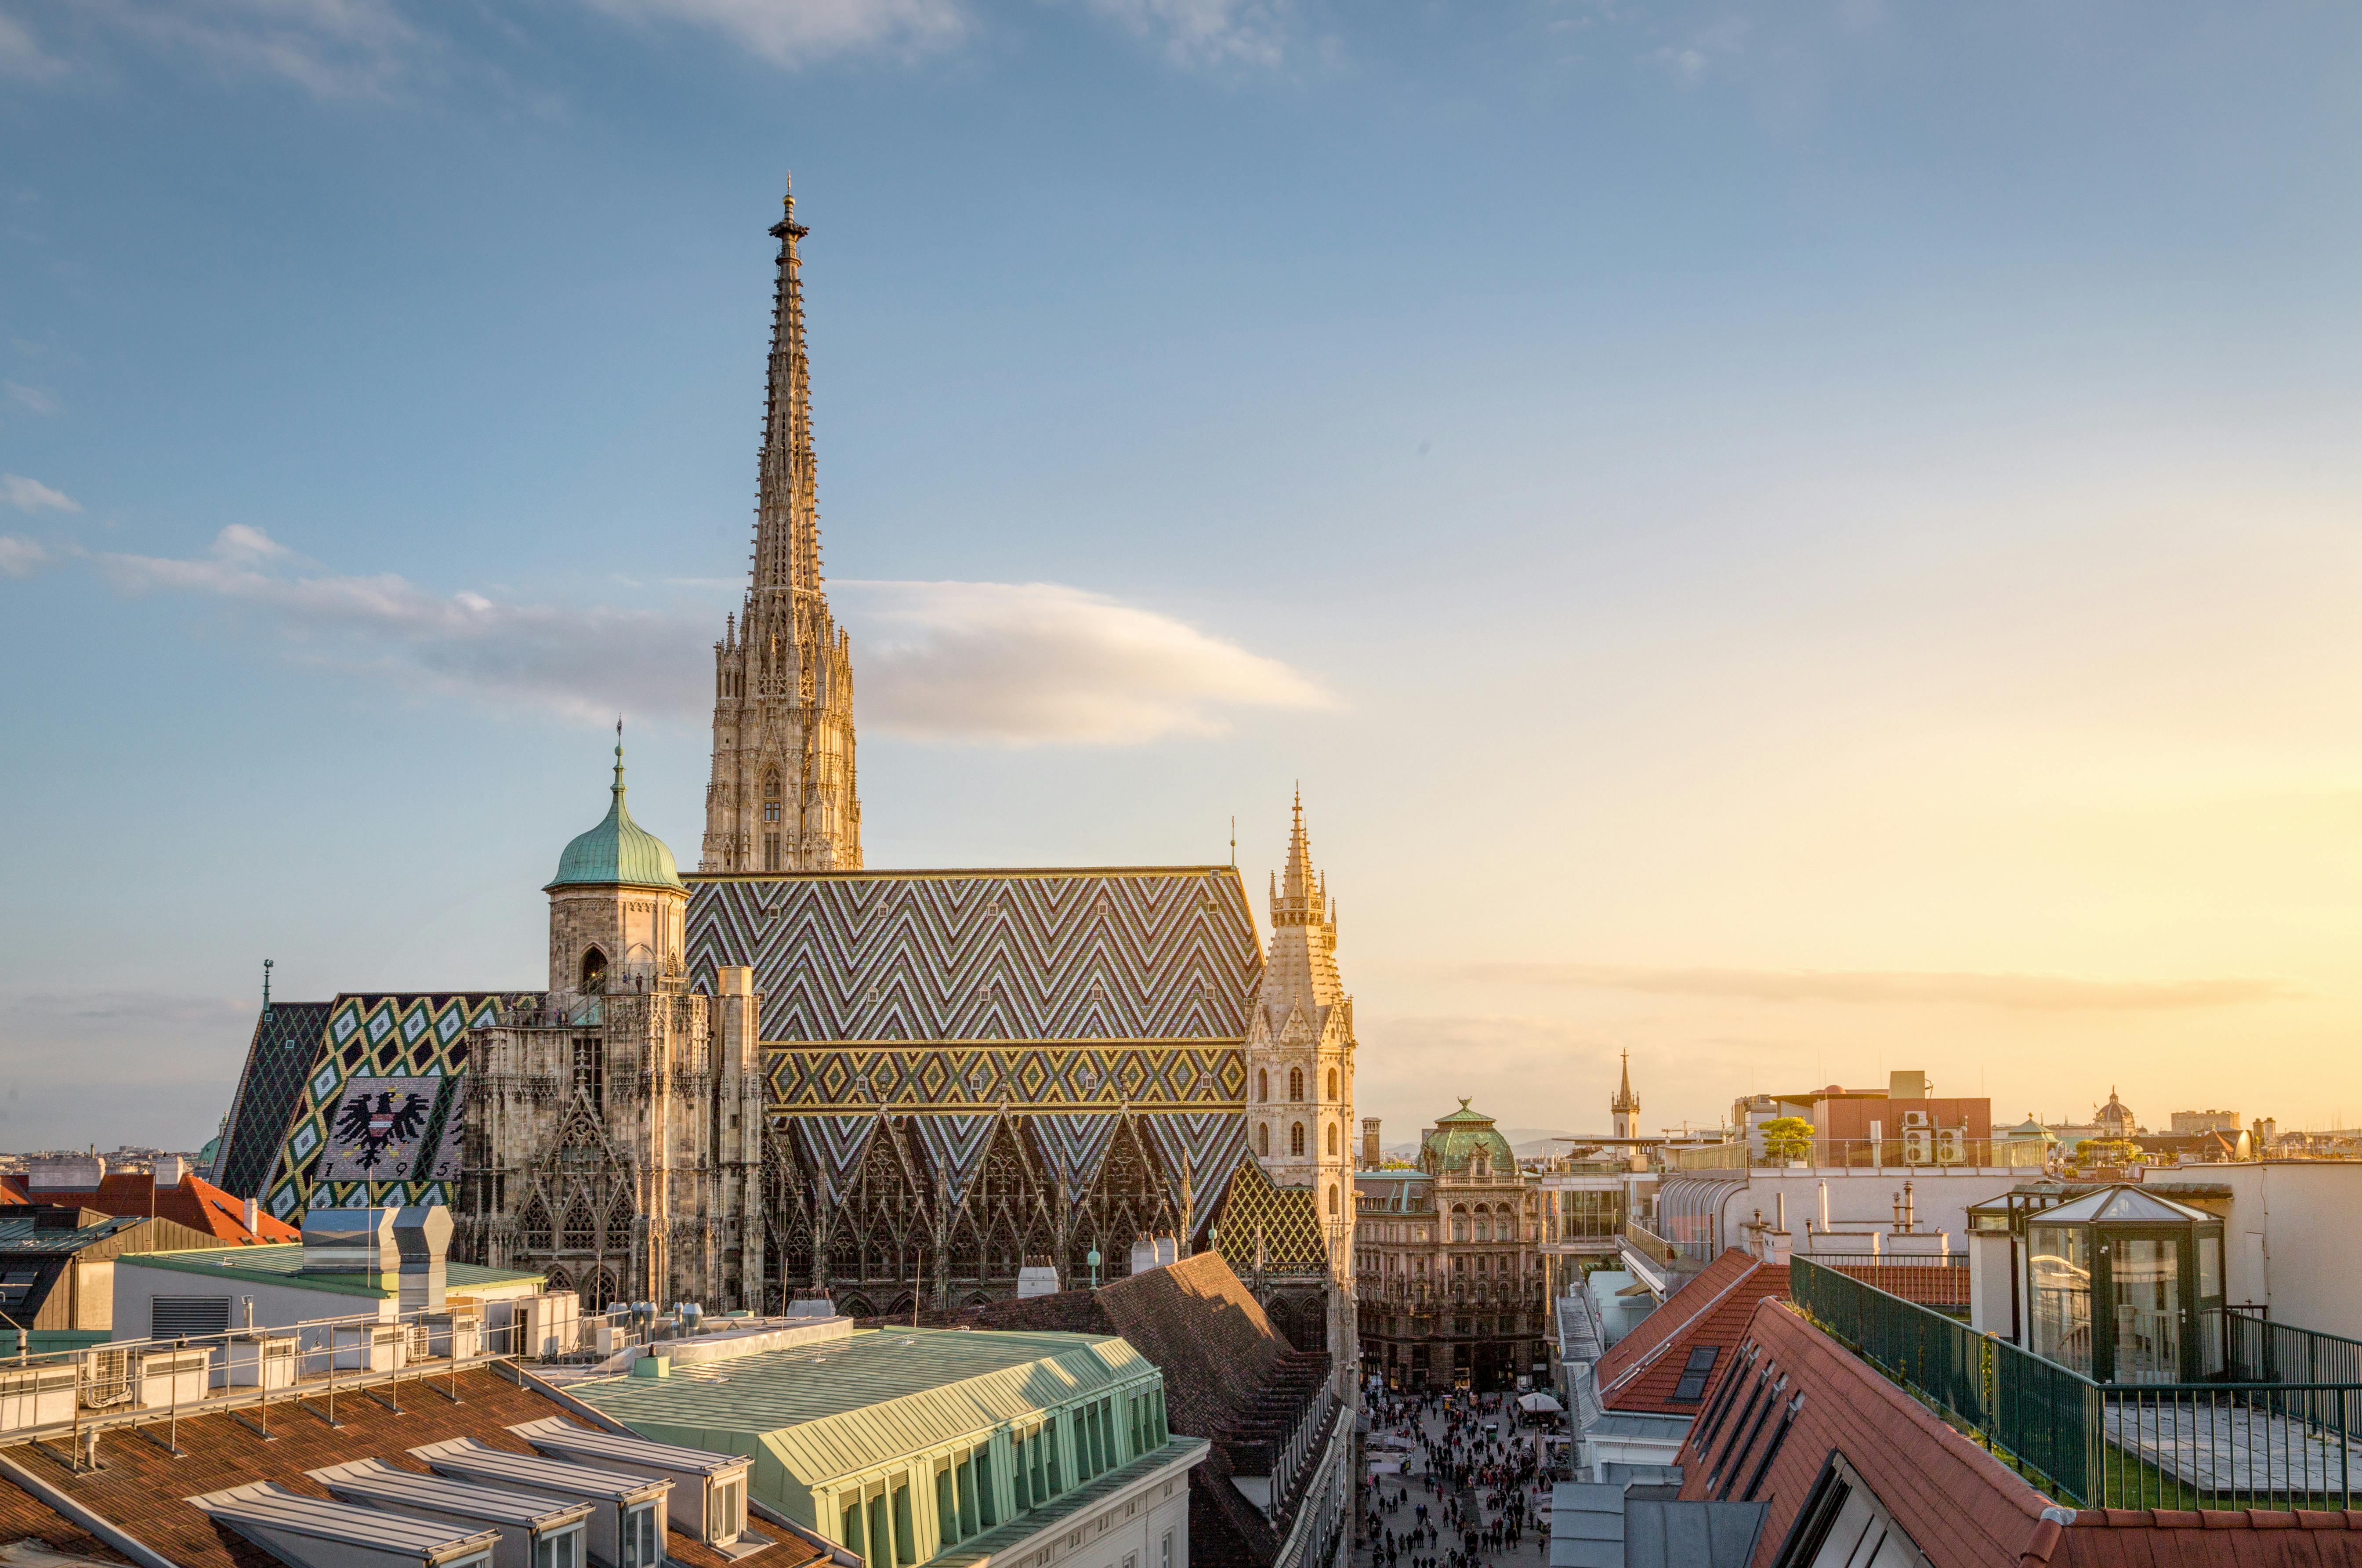 Secrets of the St. Stephen's Cathedral in Vienna guided tour